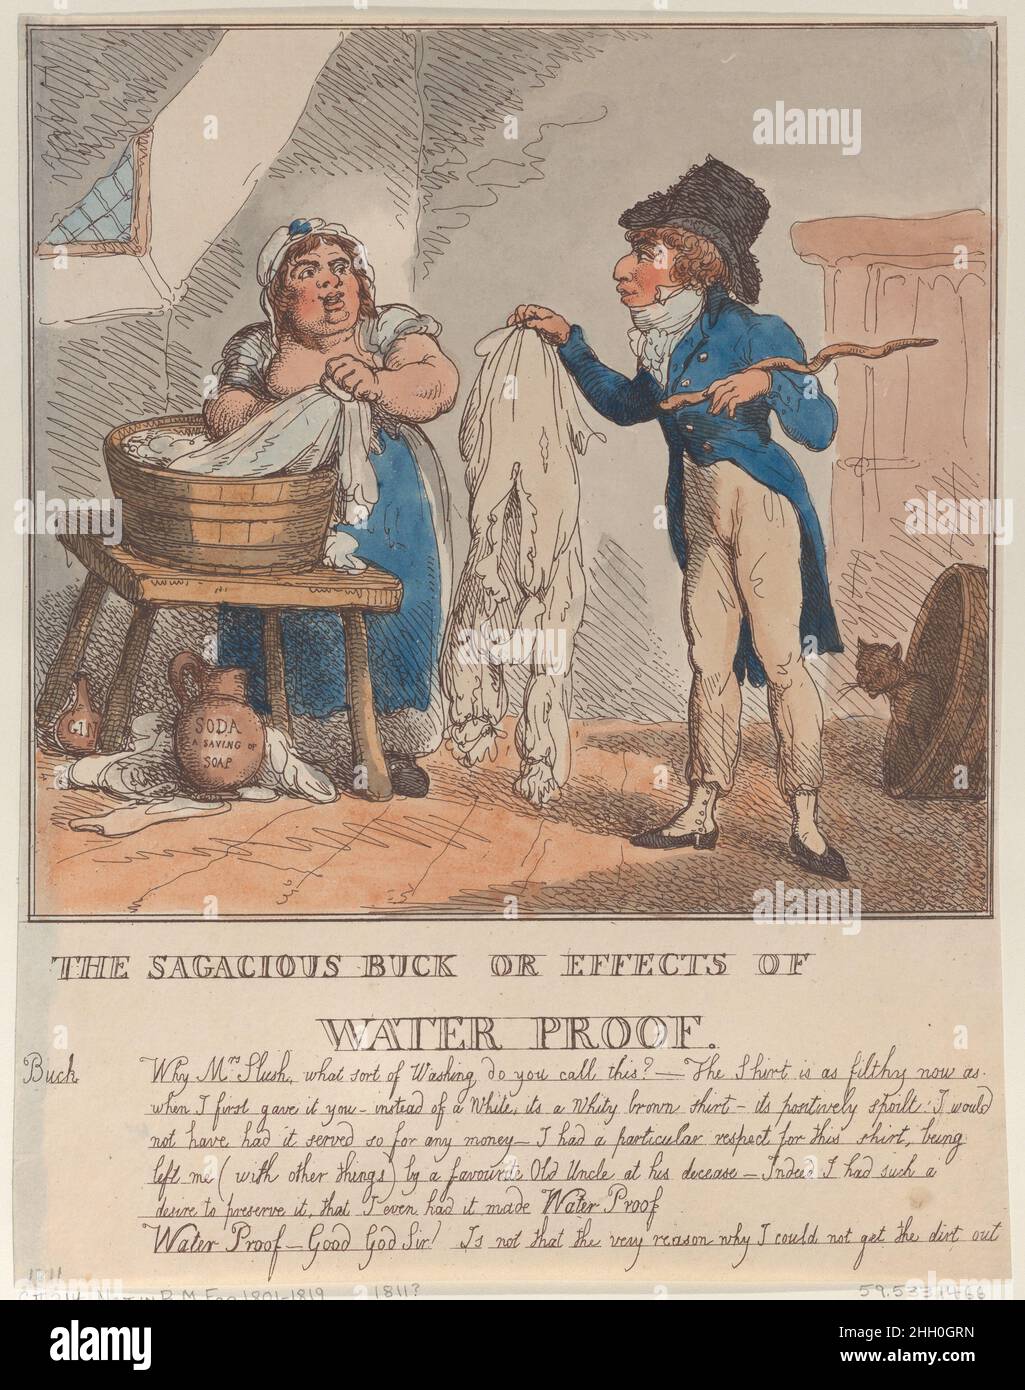 The Sagacious Buck or Effects of Water Proof 1811? Thomas Rowlandson A man holds his shirt out towards a woman who is washing clothes. He asks her why it is still dirty and mentions that he had it waterproofed. The woman replies that she couldn't get the dirt out because it is waterproofed.. The Sagacious Buck or Effects of Water Proof. Thomas Rowlandson (British, London 1757–1827 London). 1811?. Hand-colored etching. Thomas Tegg (British, 1776–1846). Prints Stock Photo